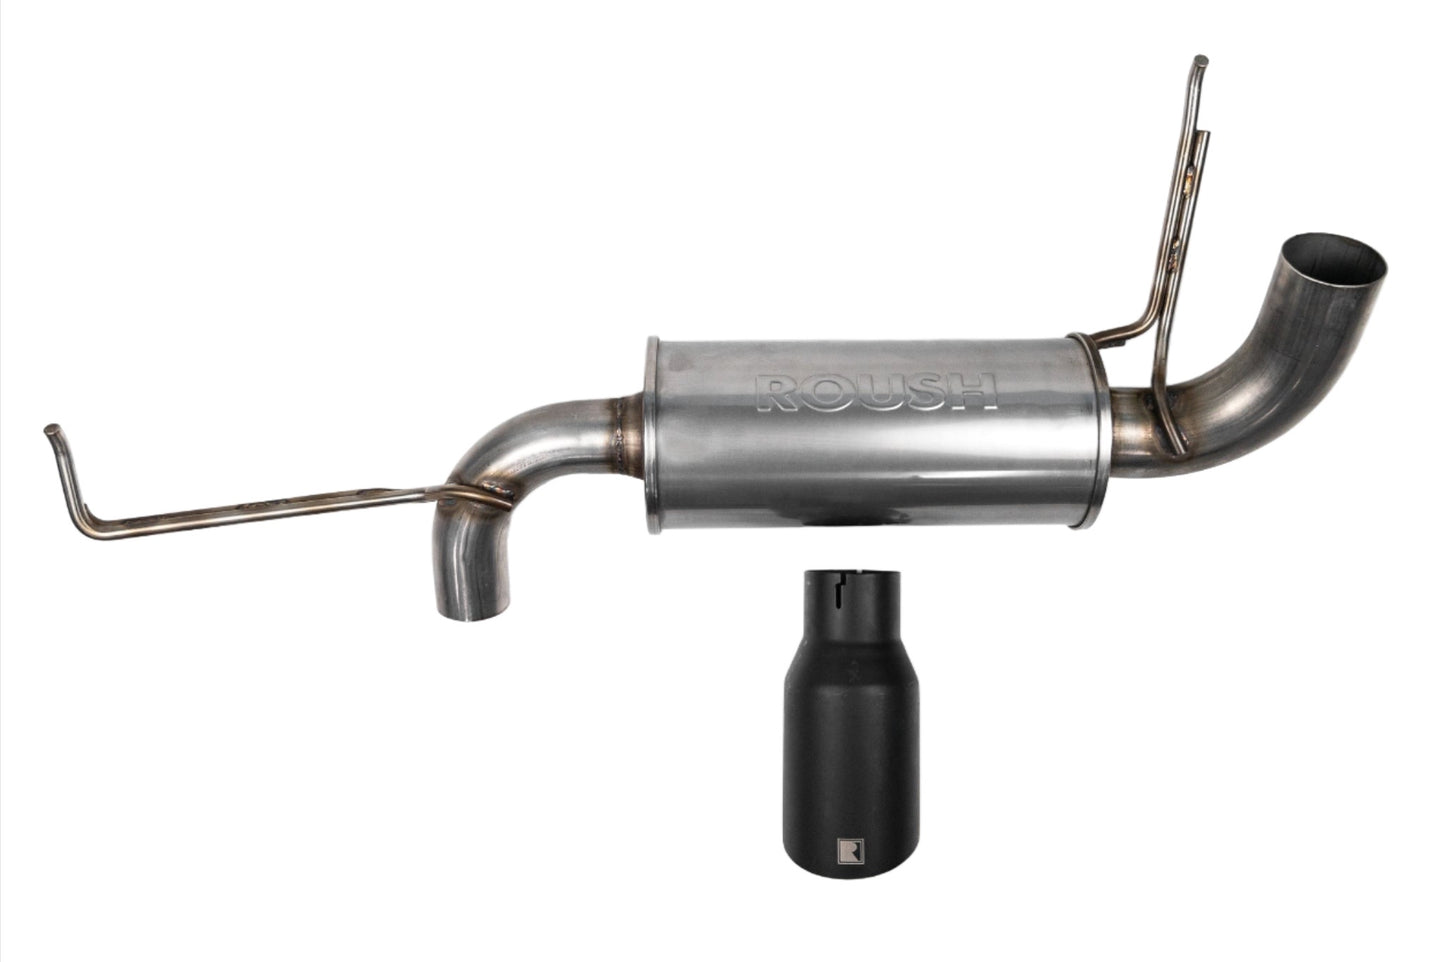 Car exhaust system parts including a silencer and pipes for 2021-2024 Roush Bronco Performance Exhaust 2.3 and 2.7, isolated on a white background from Roush Performance Products, Inc.